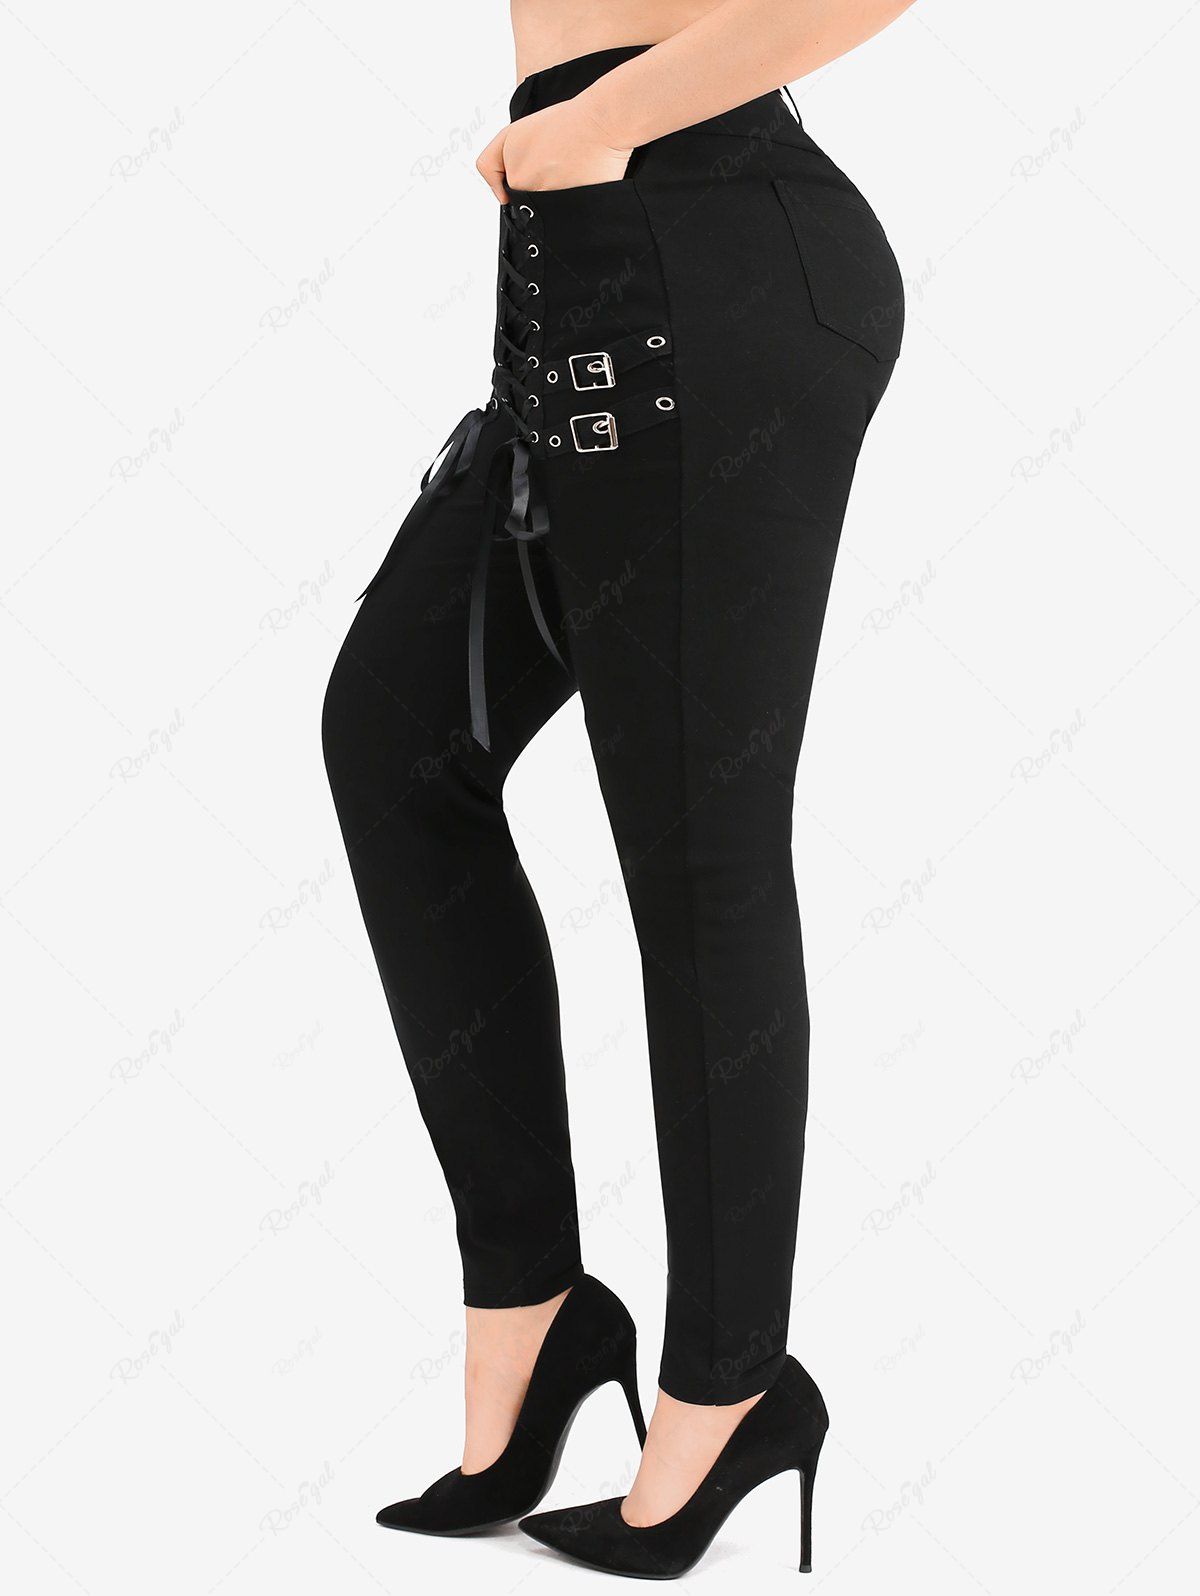 Fancy Plus Size Lace Up Pockets Buckle Pull On Leggings  